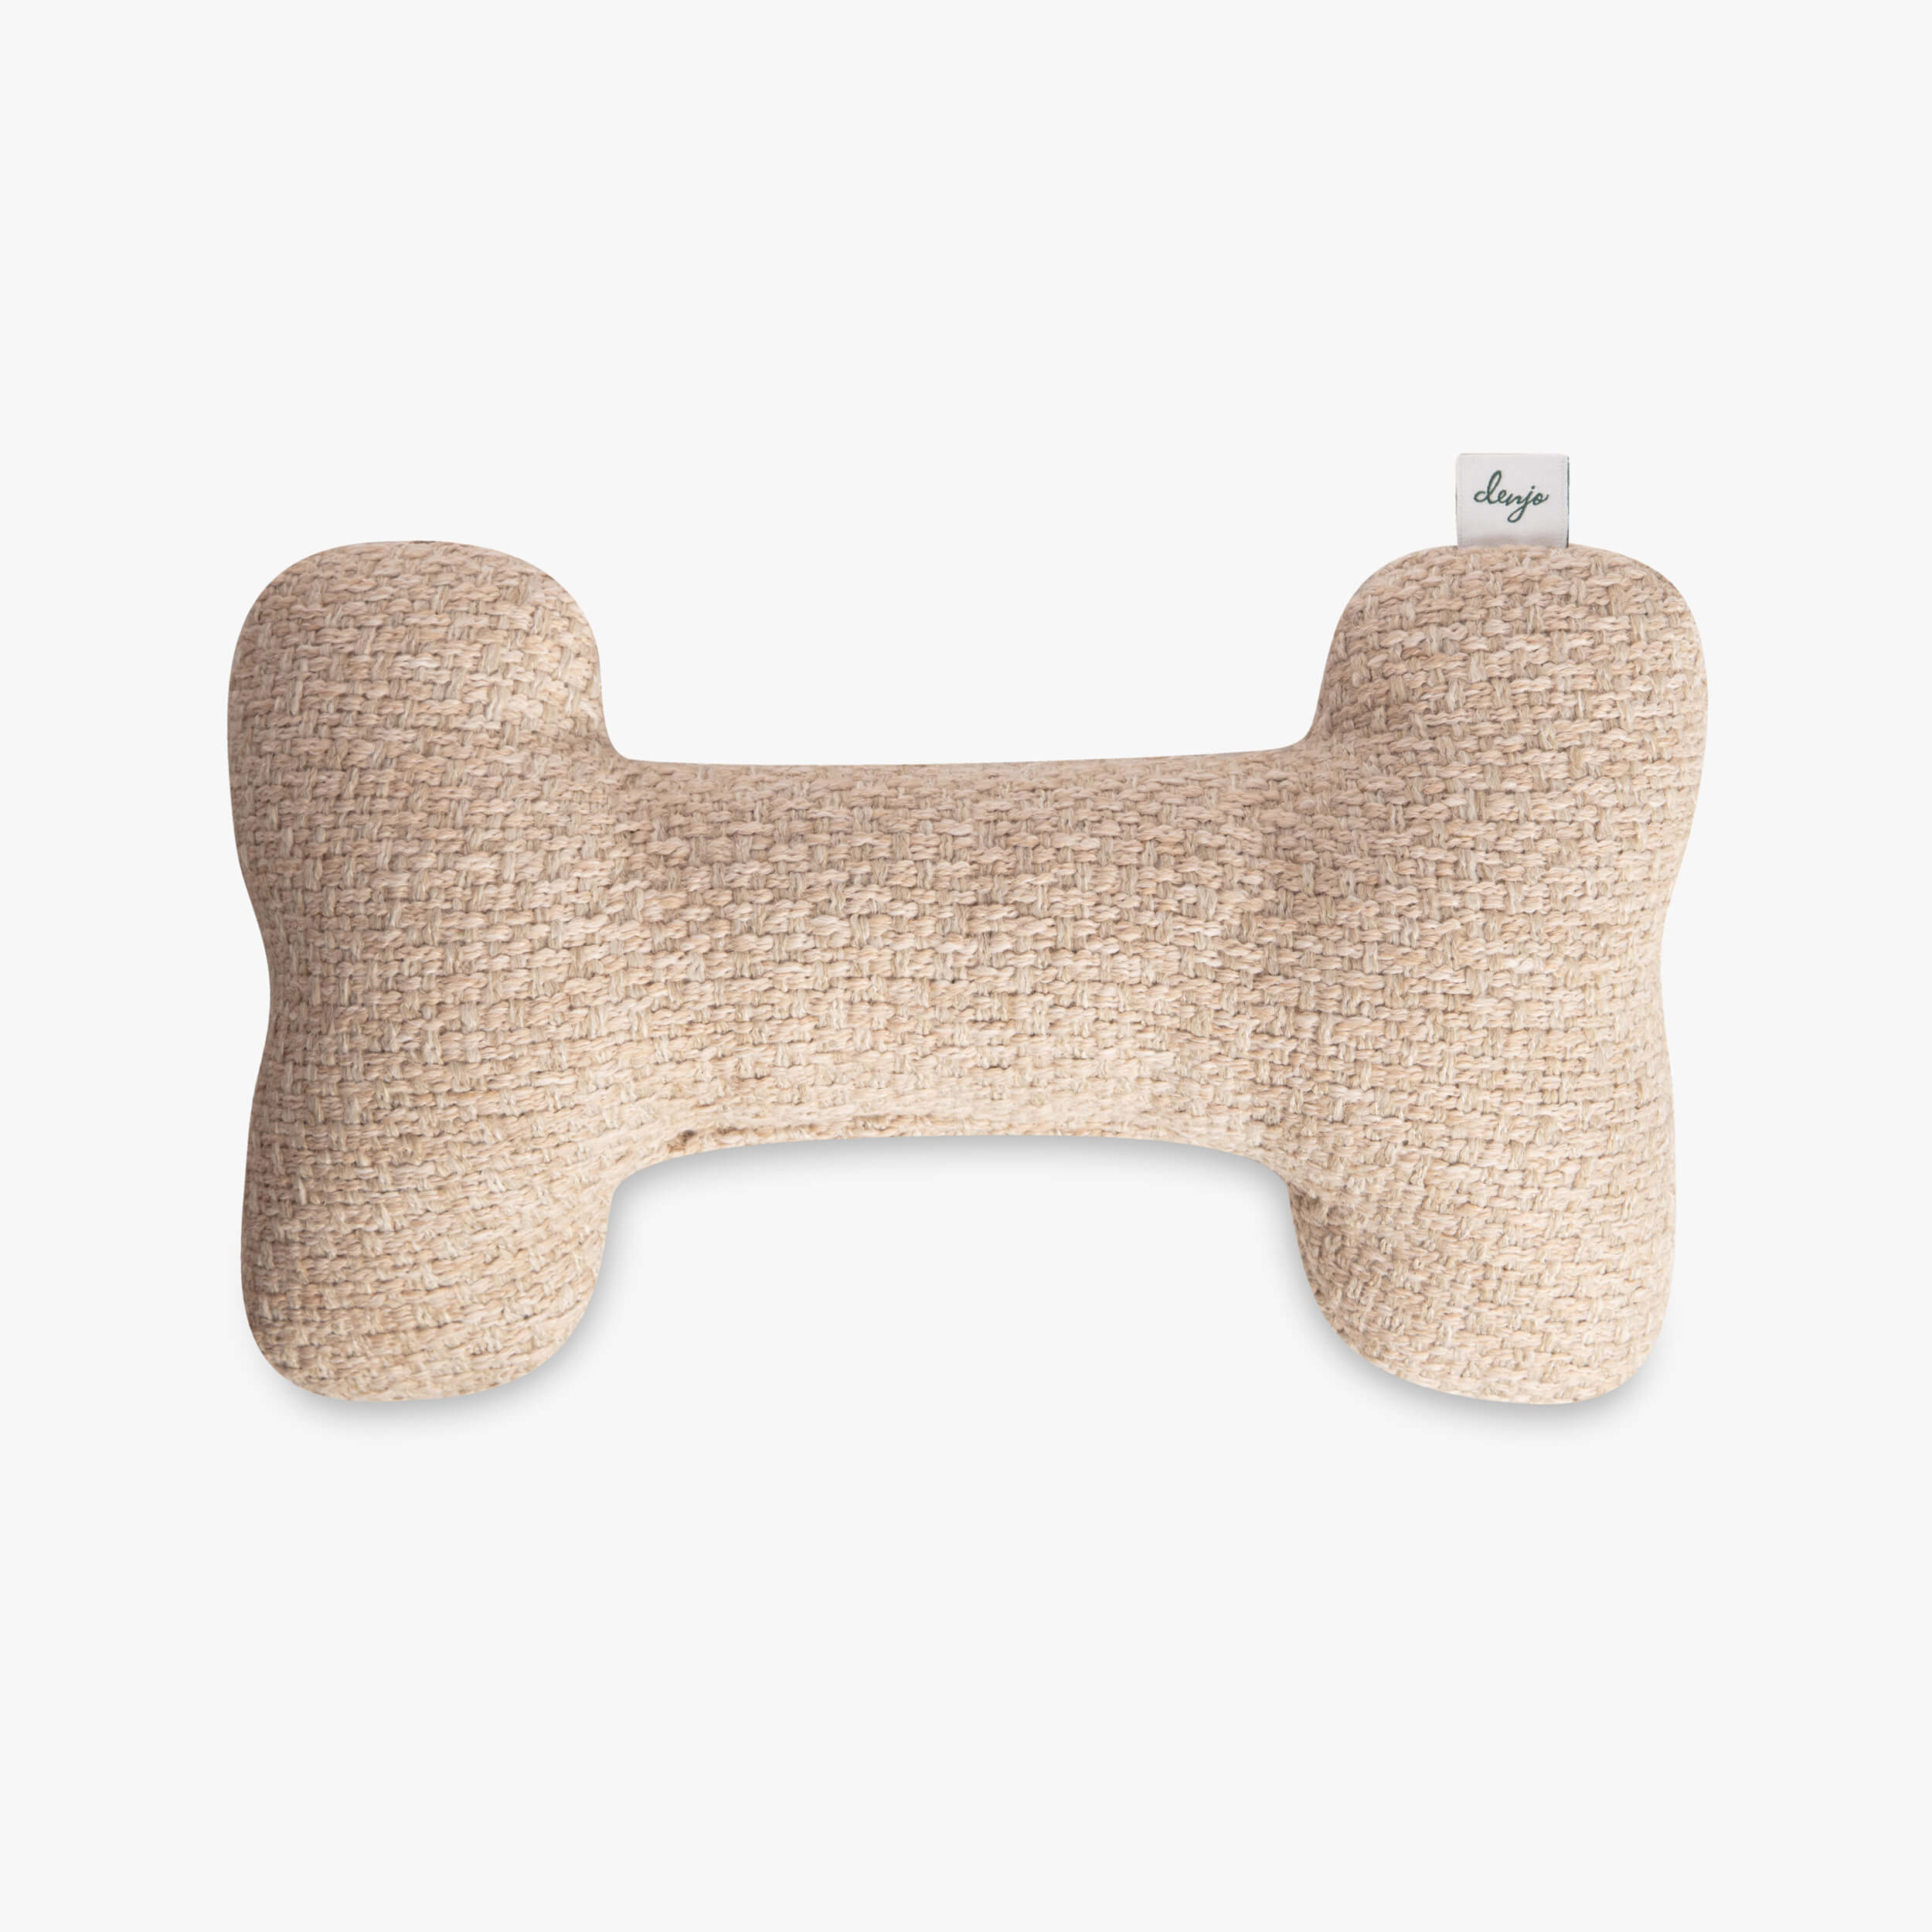 Pluto Bone Dog Toy in Recycled Sand